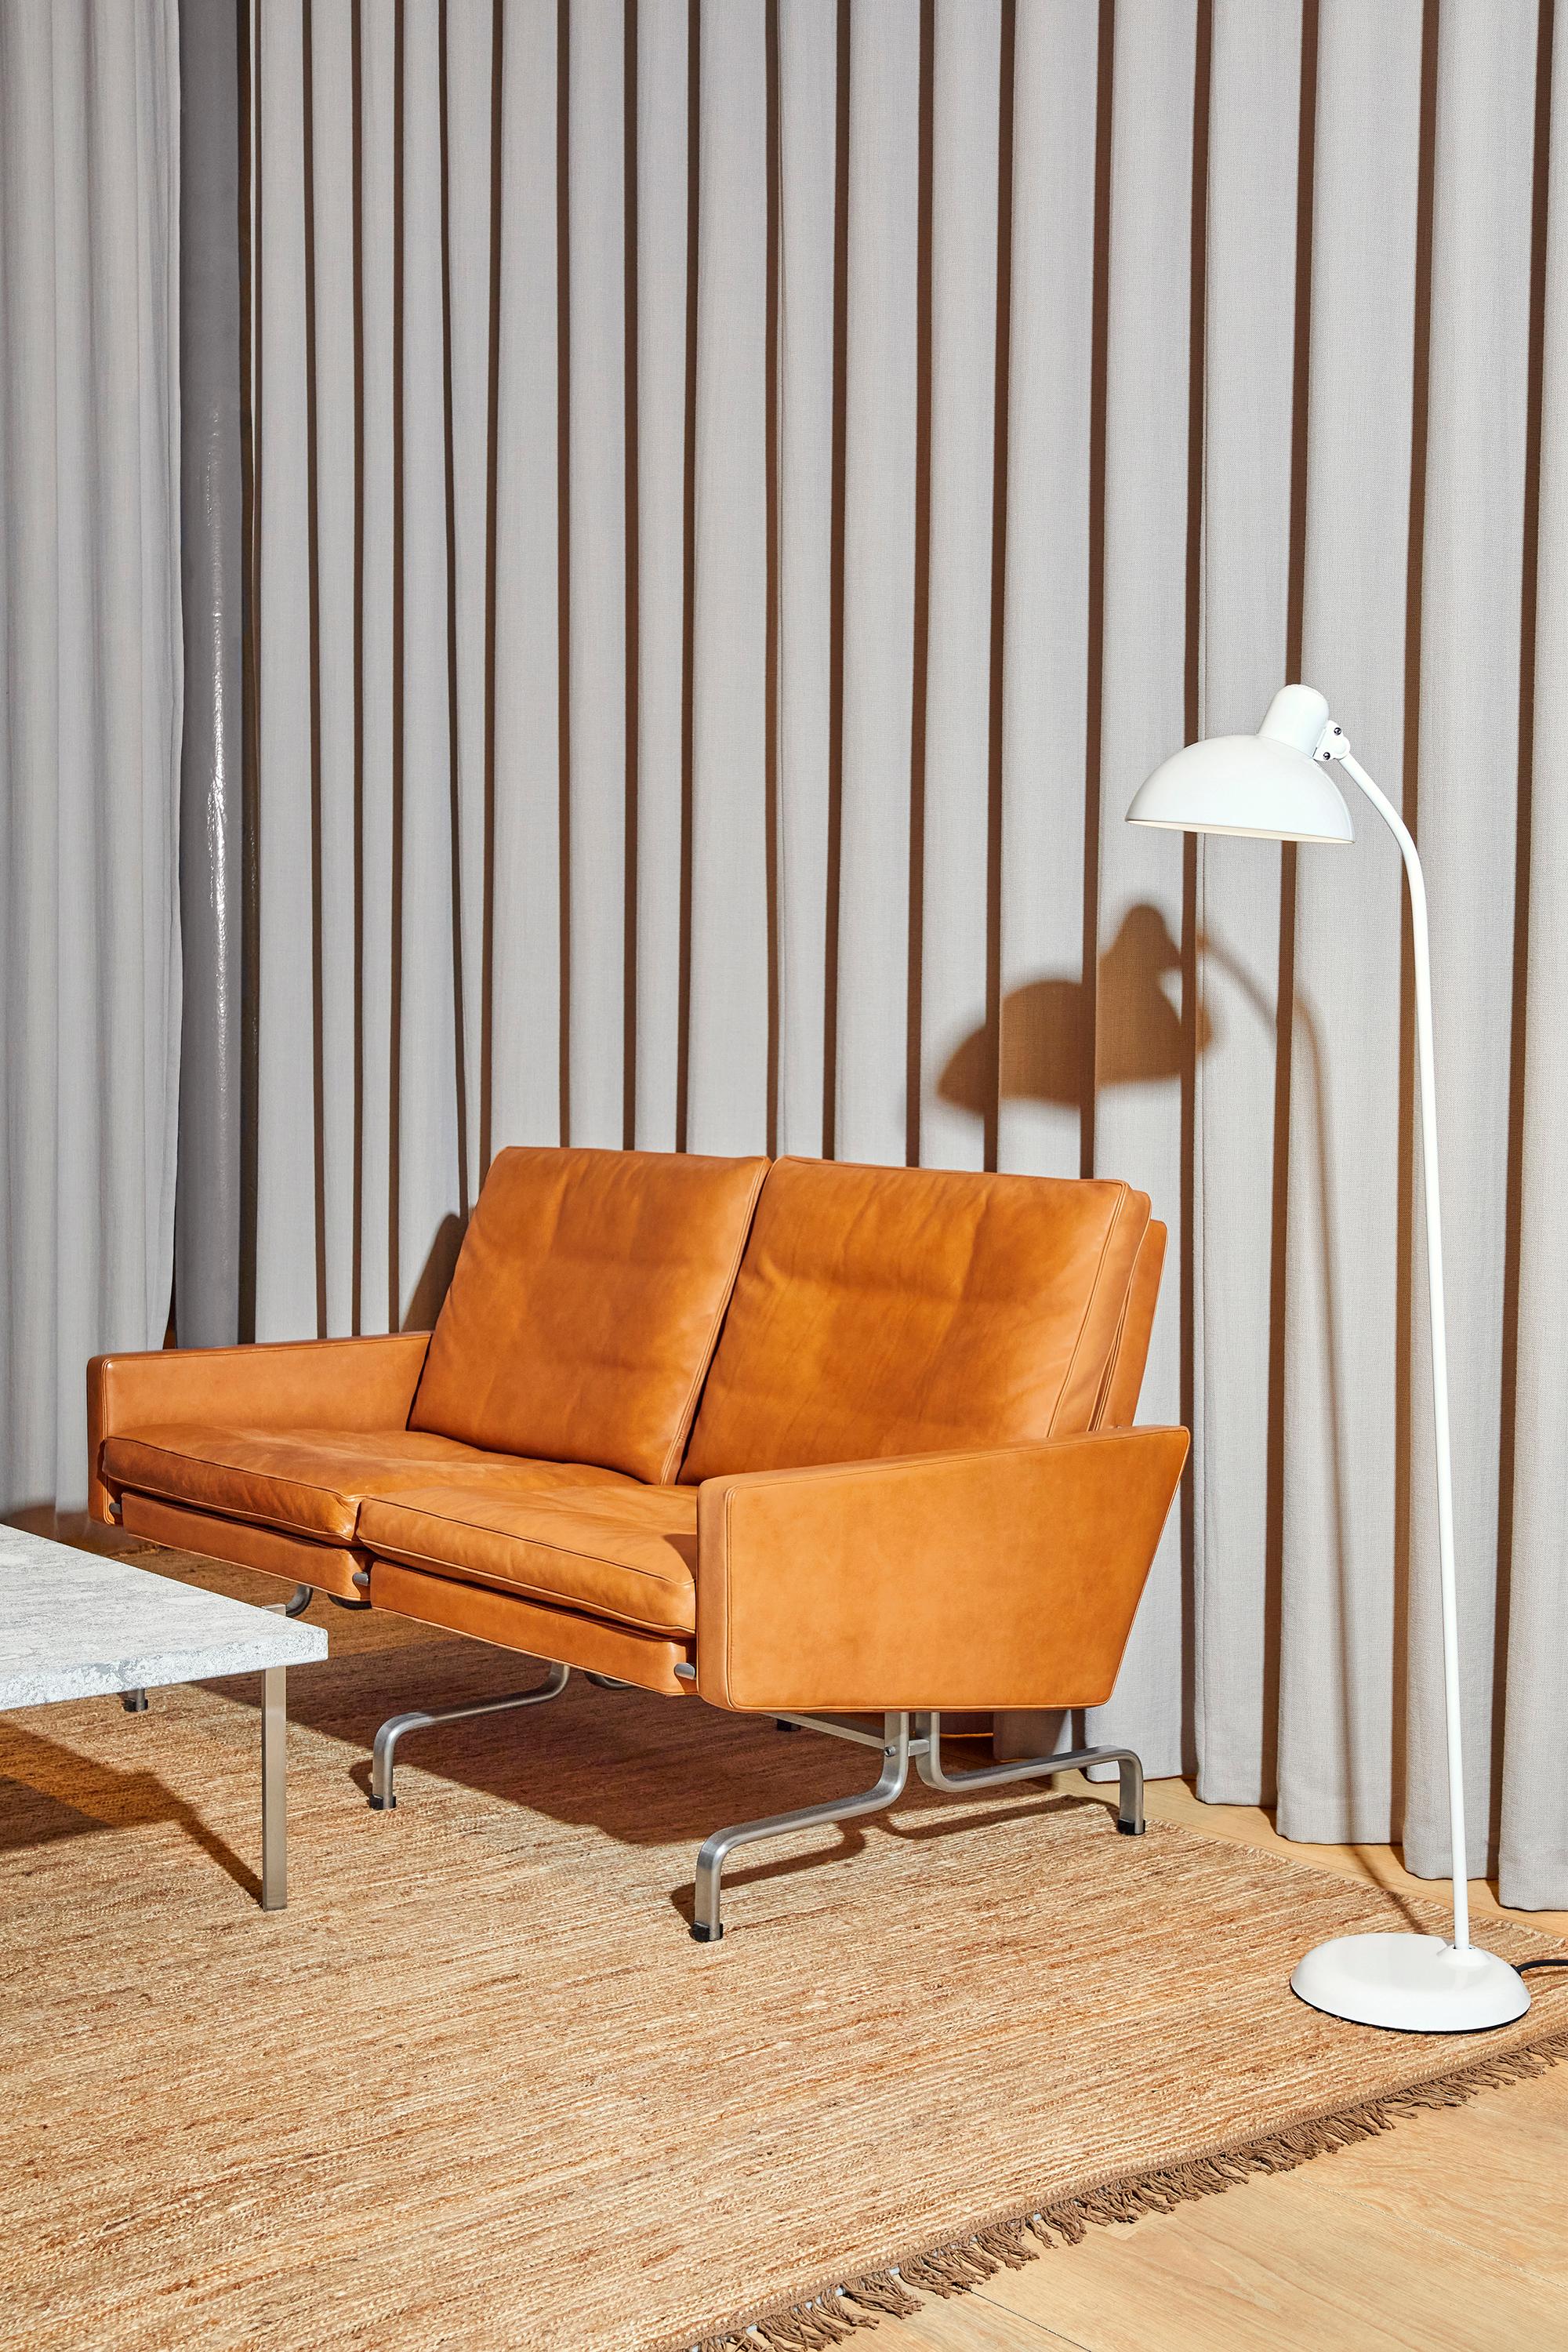 Poul Kjærholm 'PK31' 2-Seater Sofa for Fritz Hansen in Aura Leather

Established in 1872, Fritz Hansen has become synonymous with legendary Danish design. Combining timeless craftsmanship with an emphasis on sustainability, the brand’s re-editions